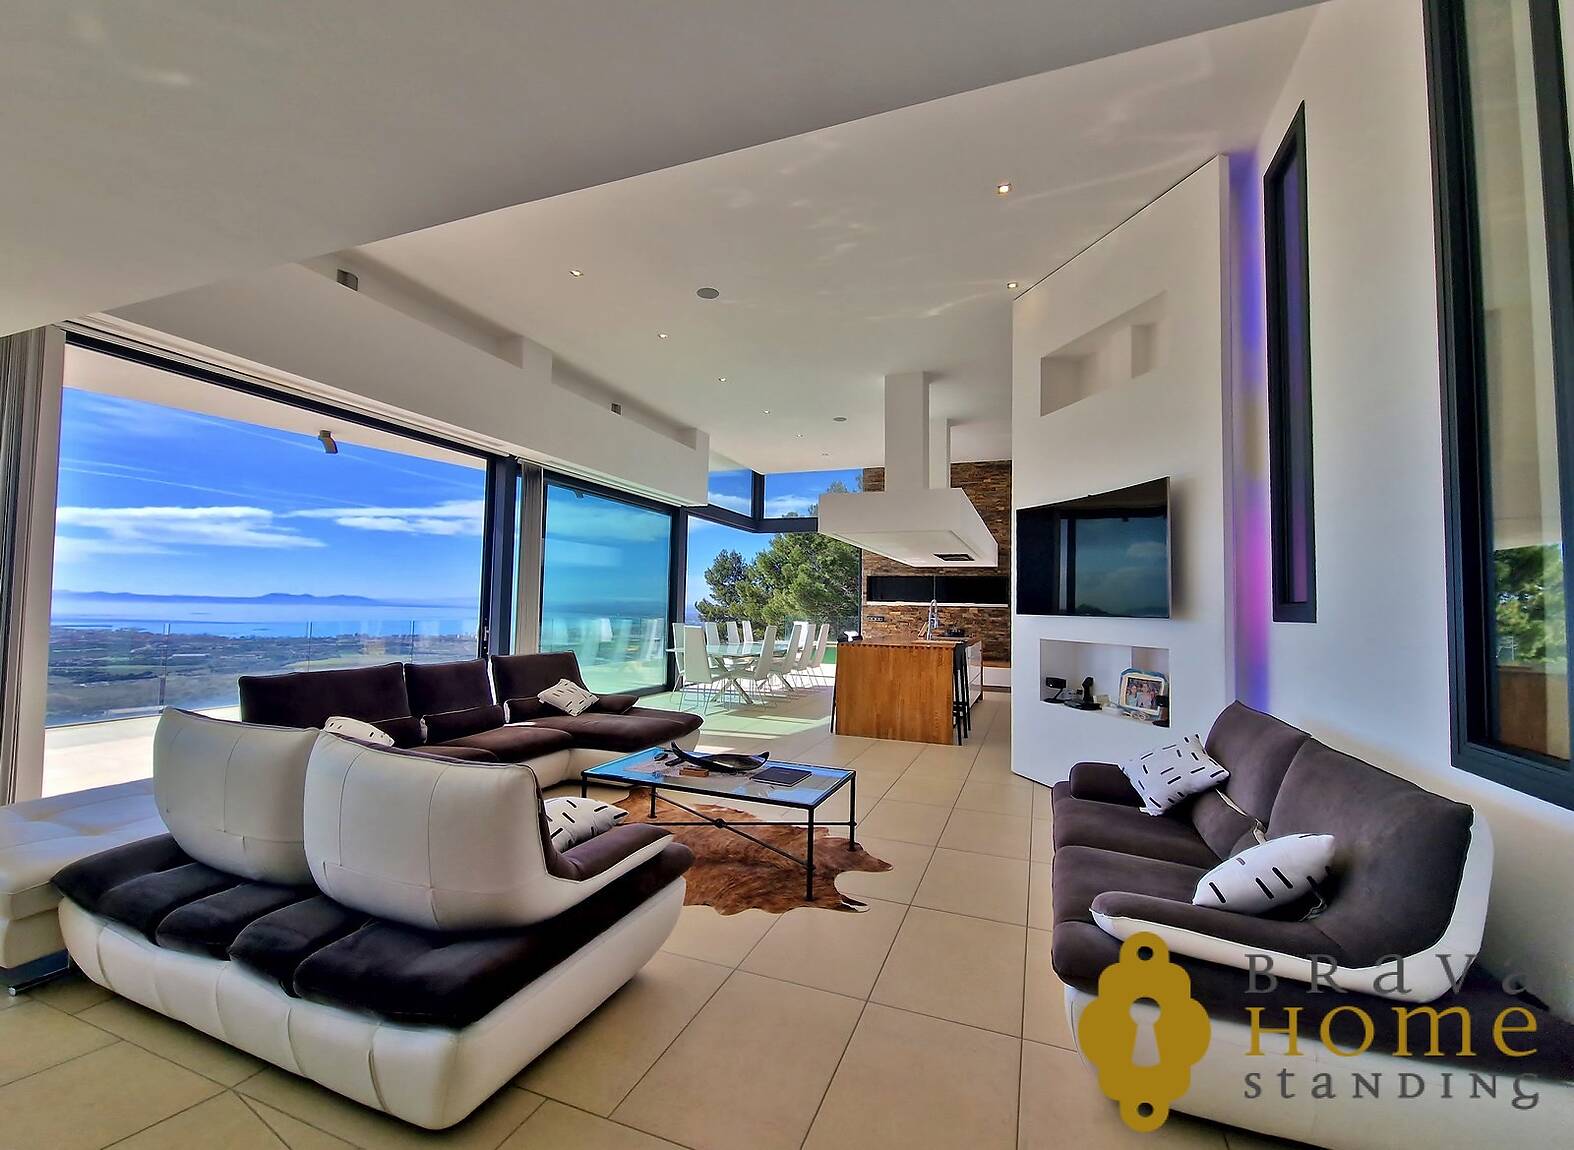 Luxurious villa with southern exposure and stunning views over the bay of Roses